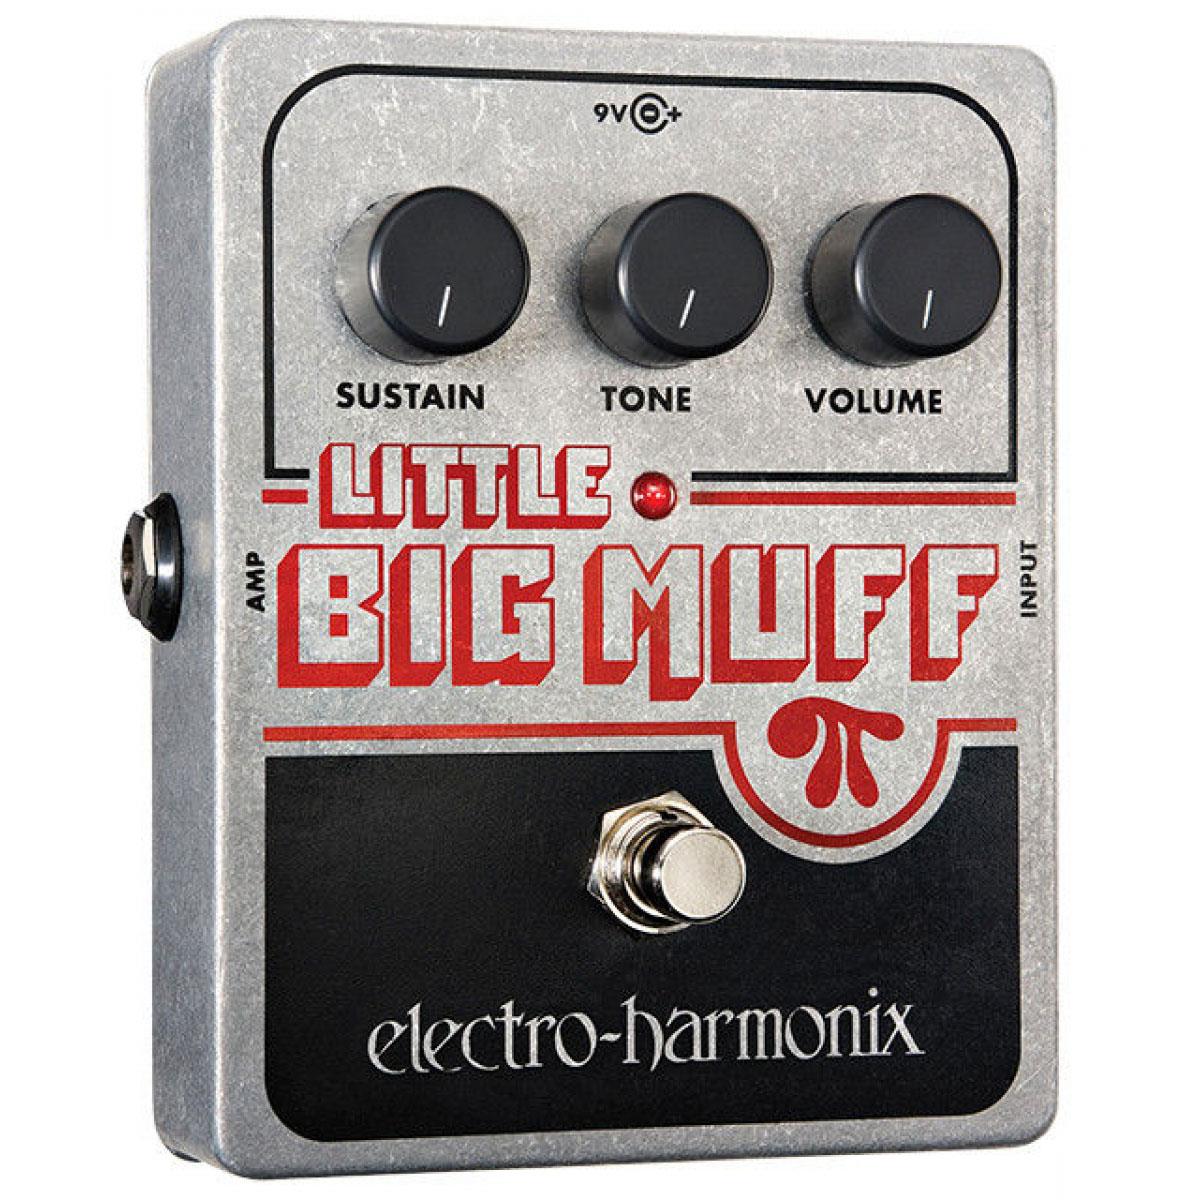 Image of Electro-Harmonix Little Big Muff Pi Fuzz/Distortion/Sustainer Pedal